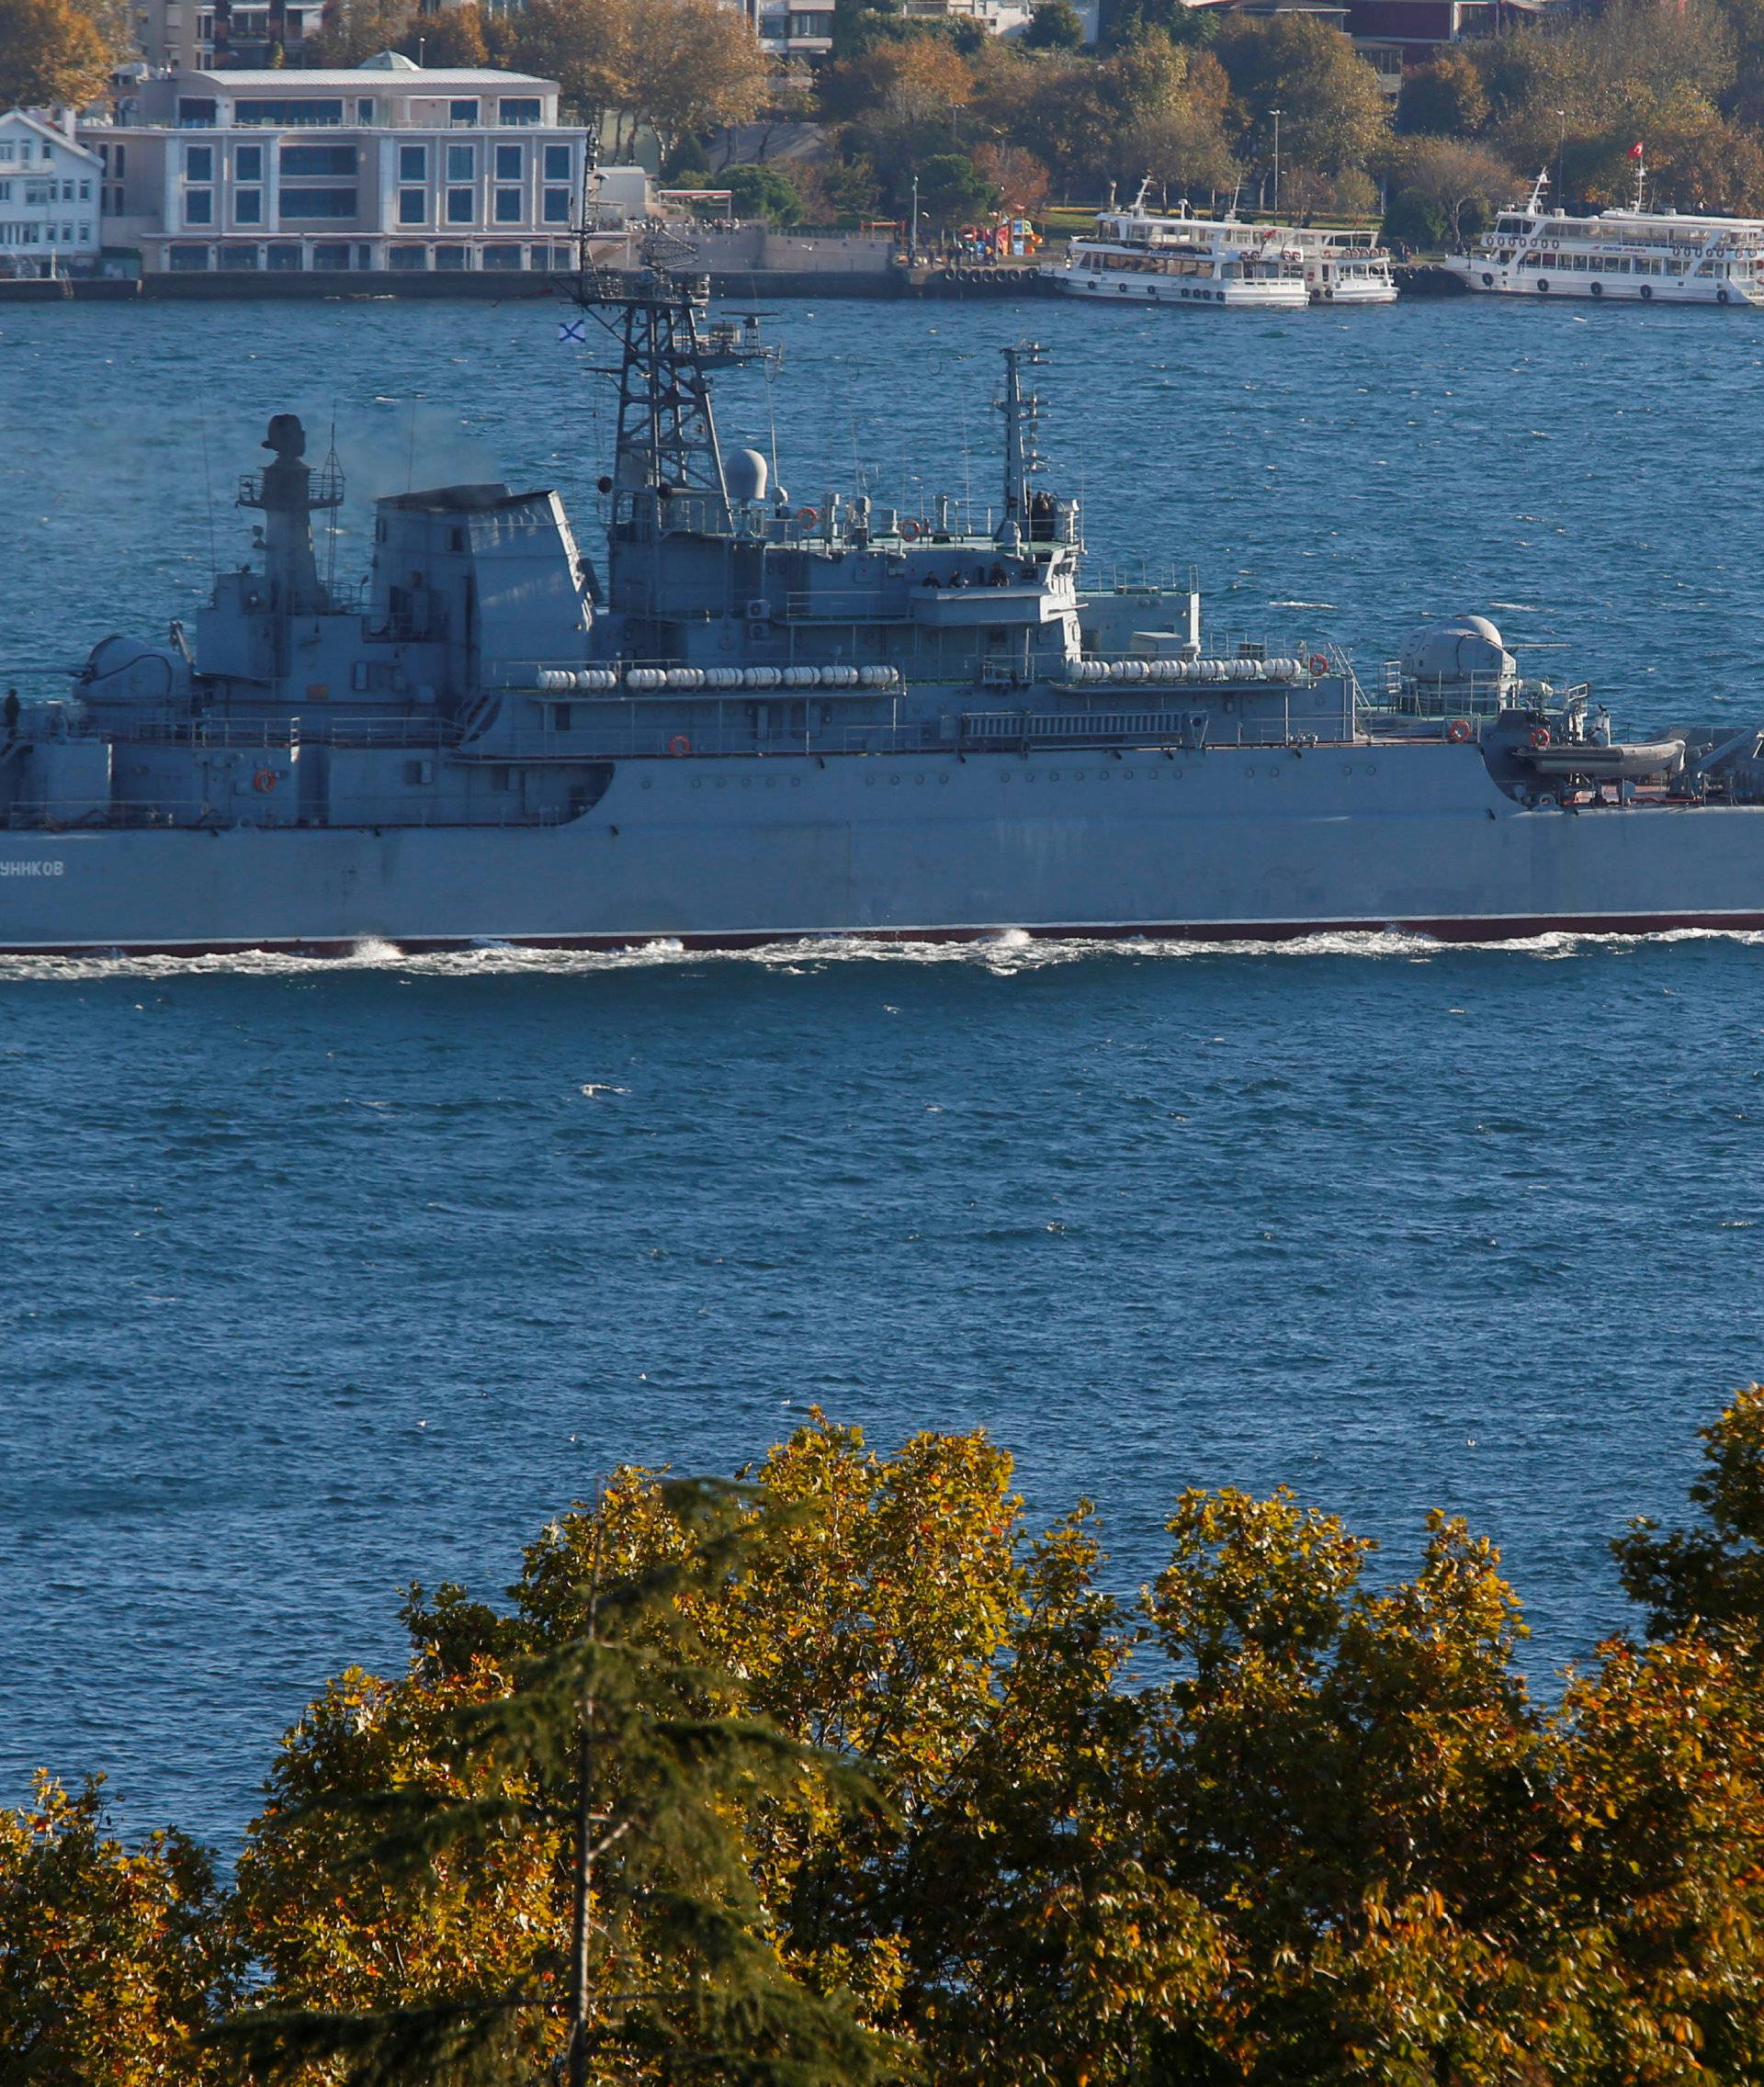 The Russian Navy's large landing ship Caesar Kunikov sails in the Bosphorus, on its way to the Mediterranean Sea, in Istanbul